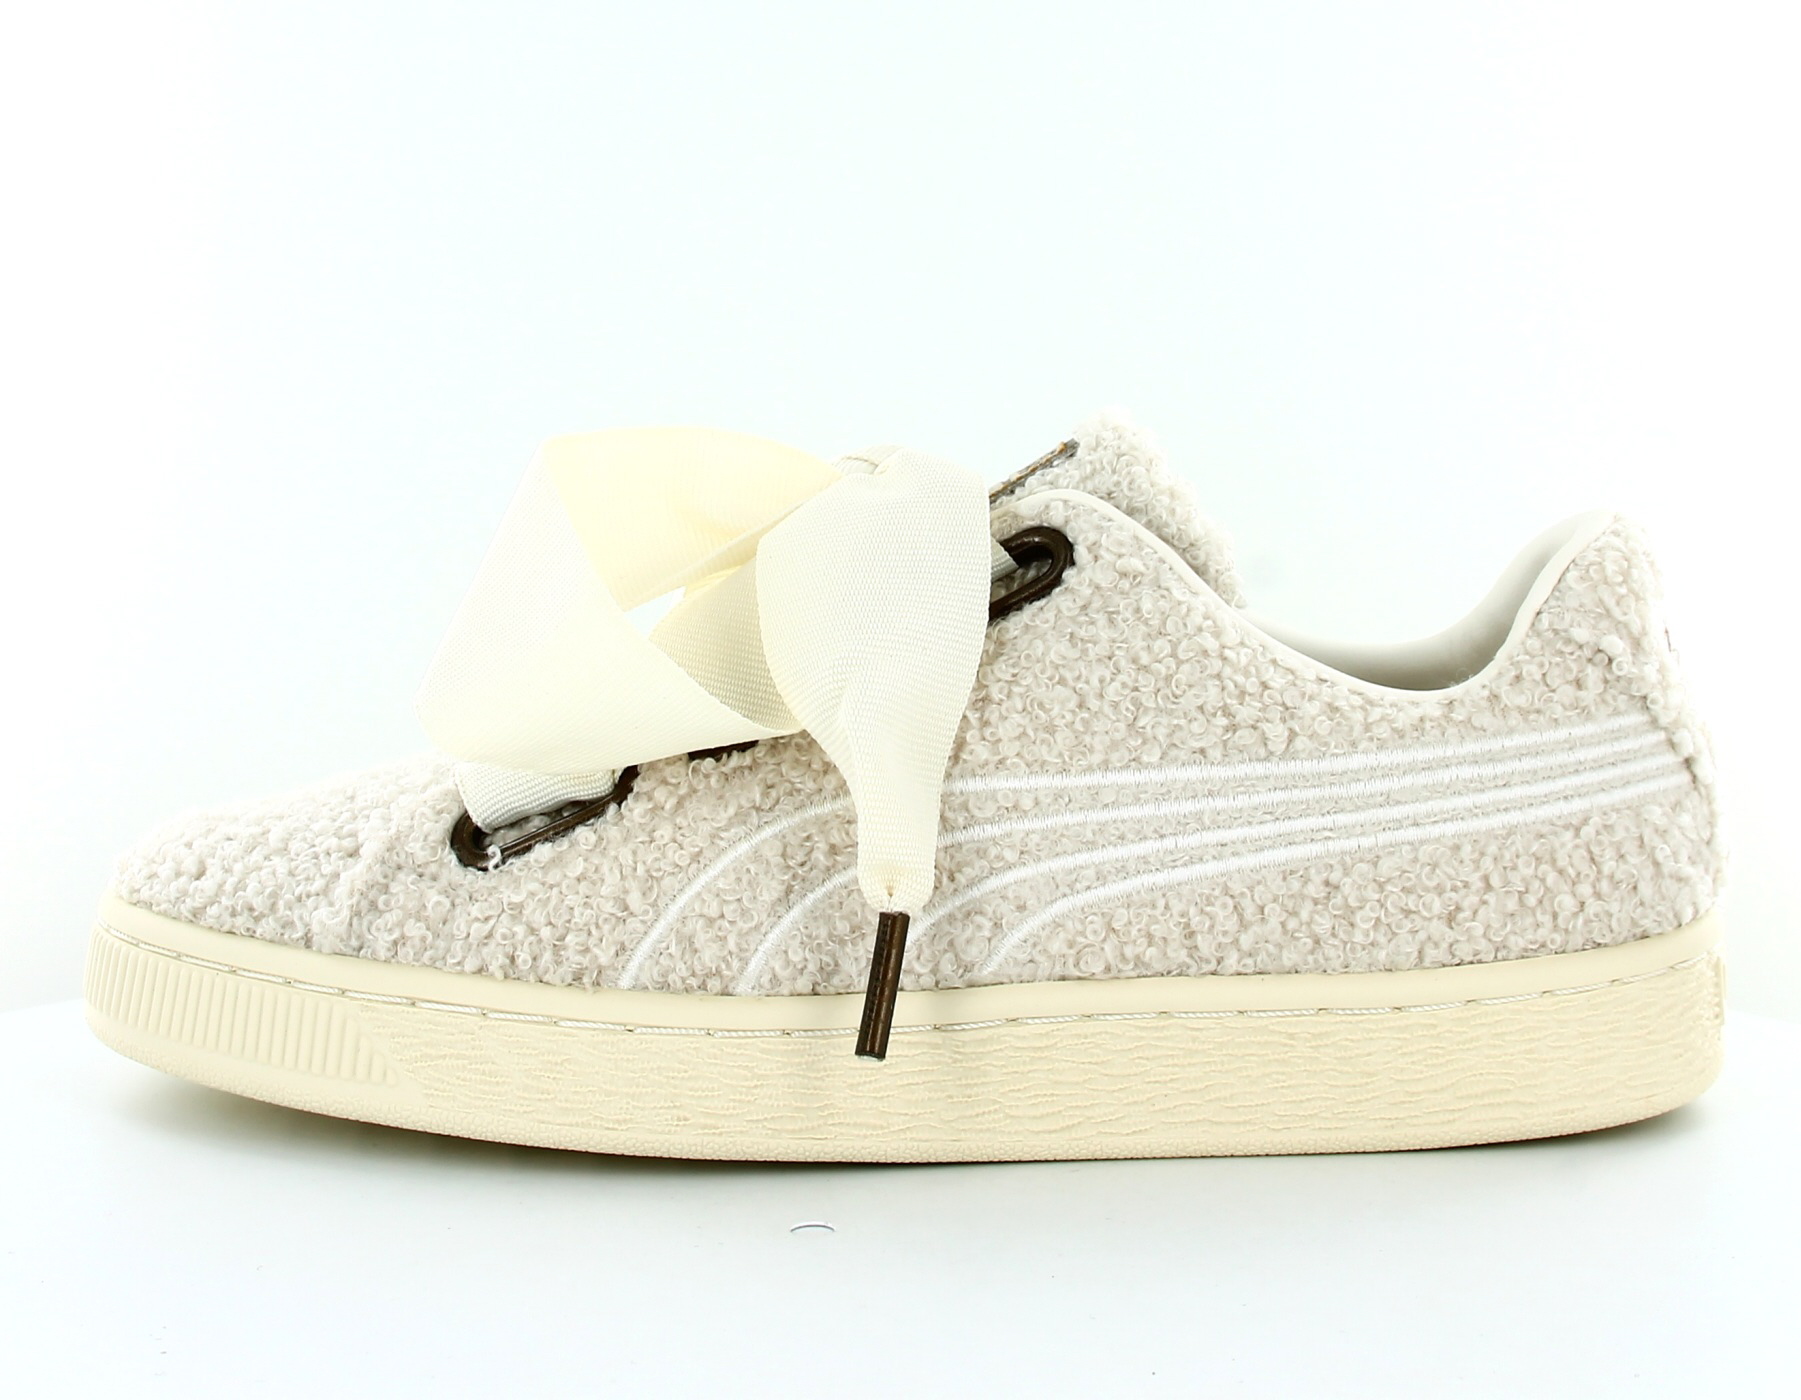 Baskets / sneakers Homme Beige Puma : Baskets / Sneakers . Besson Chaussures